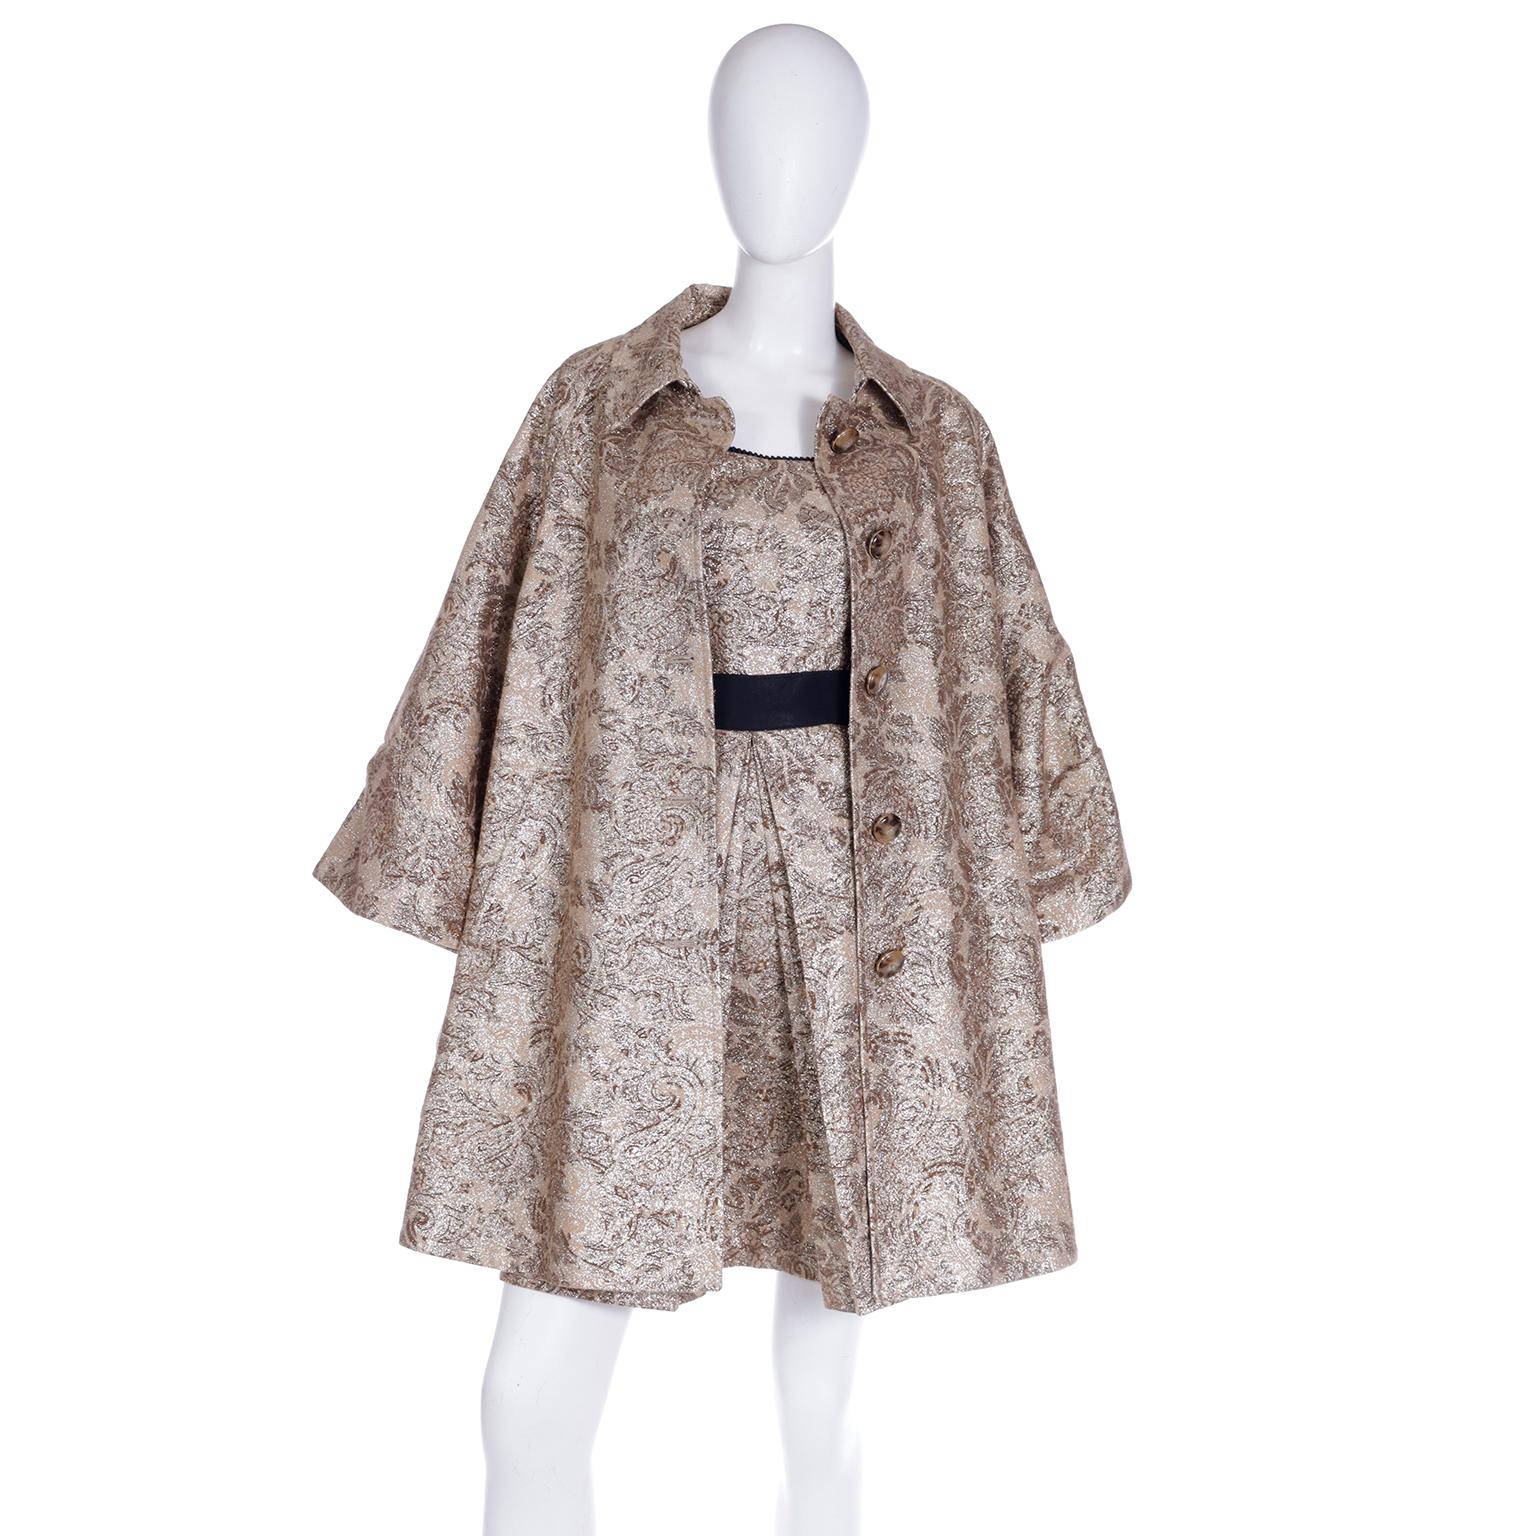 D&G Dolce & Gabbana Gold Floral Dress and Coat With Belt Amy Winehouse 2007 For Sale 2